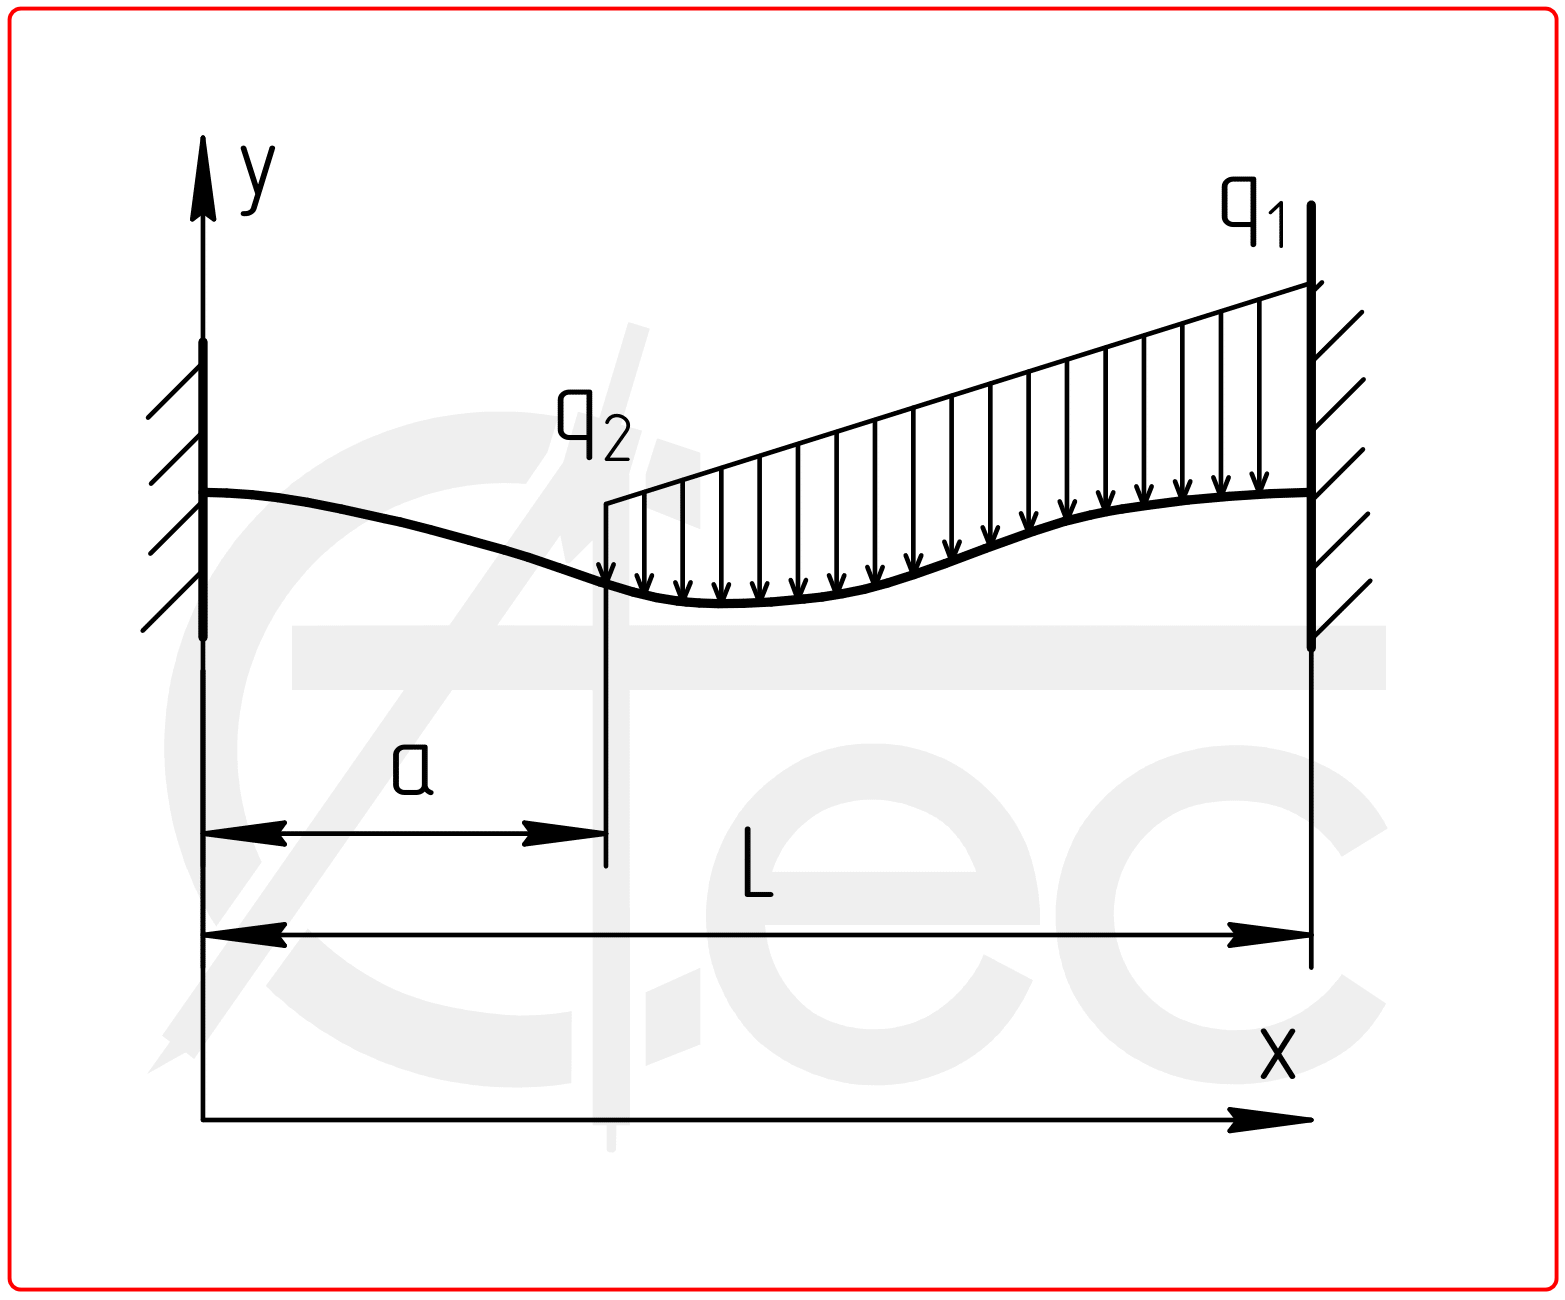 Beam with fixed end and simply supported end under distributed load